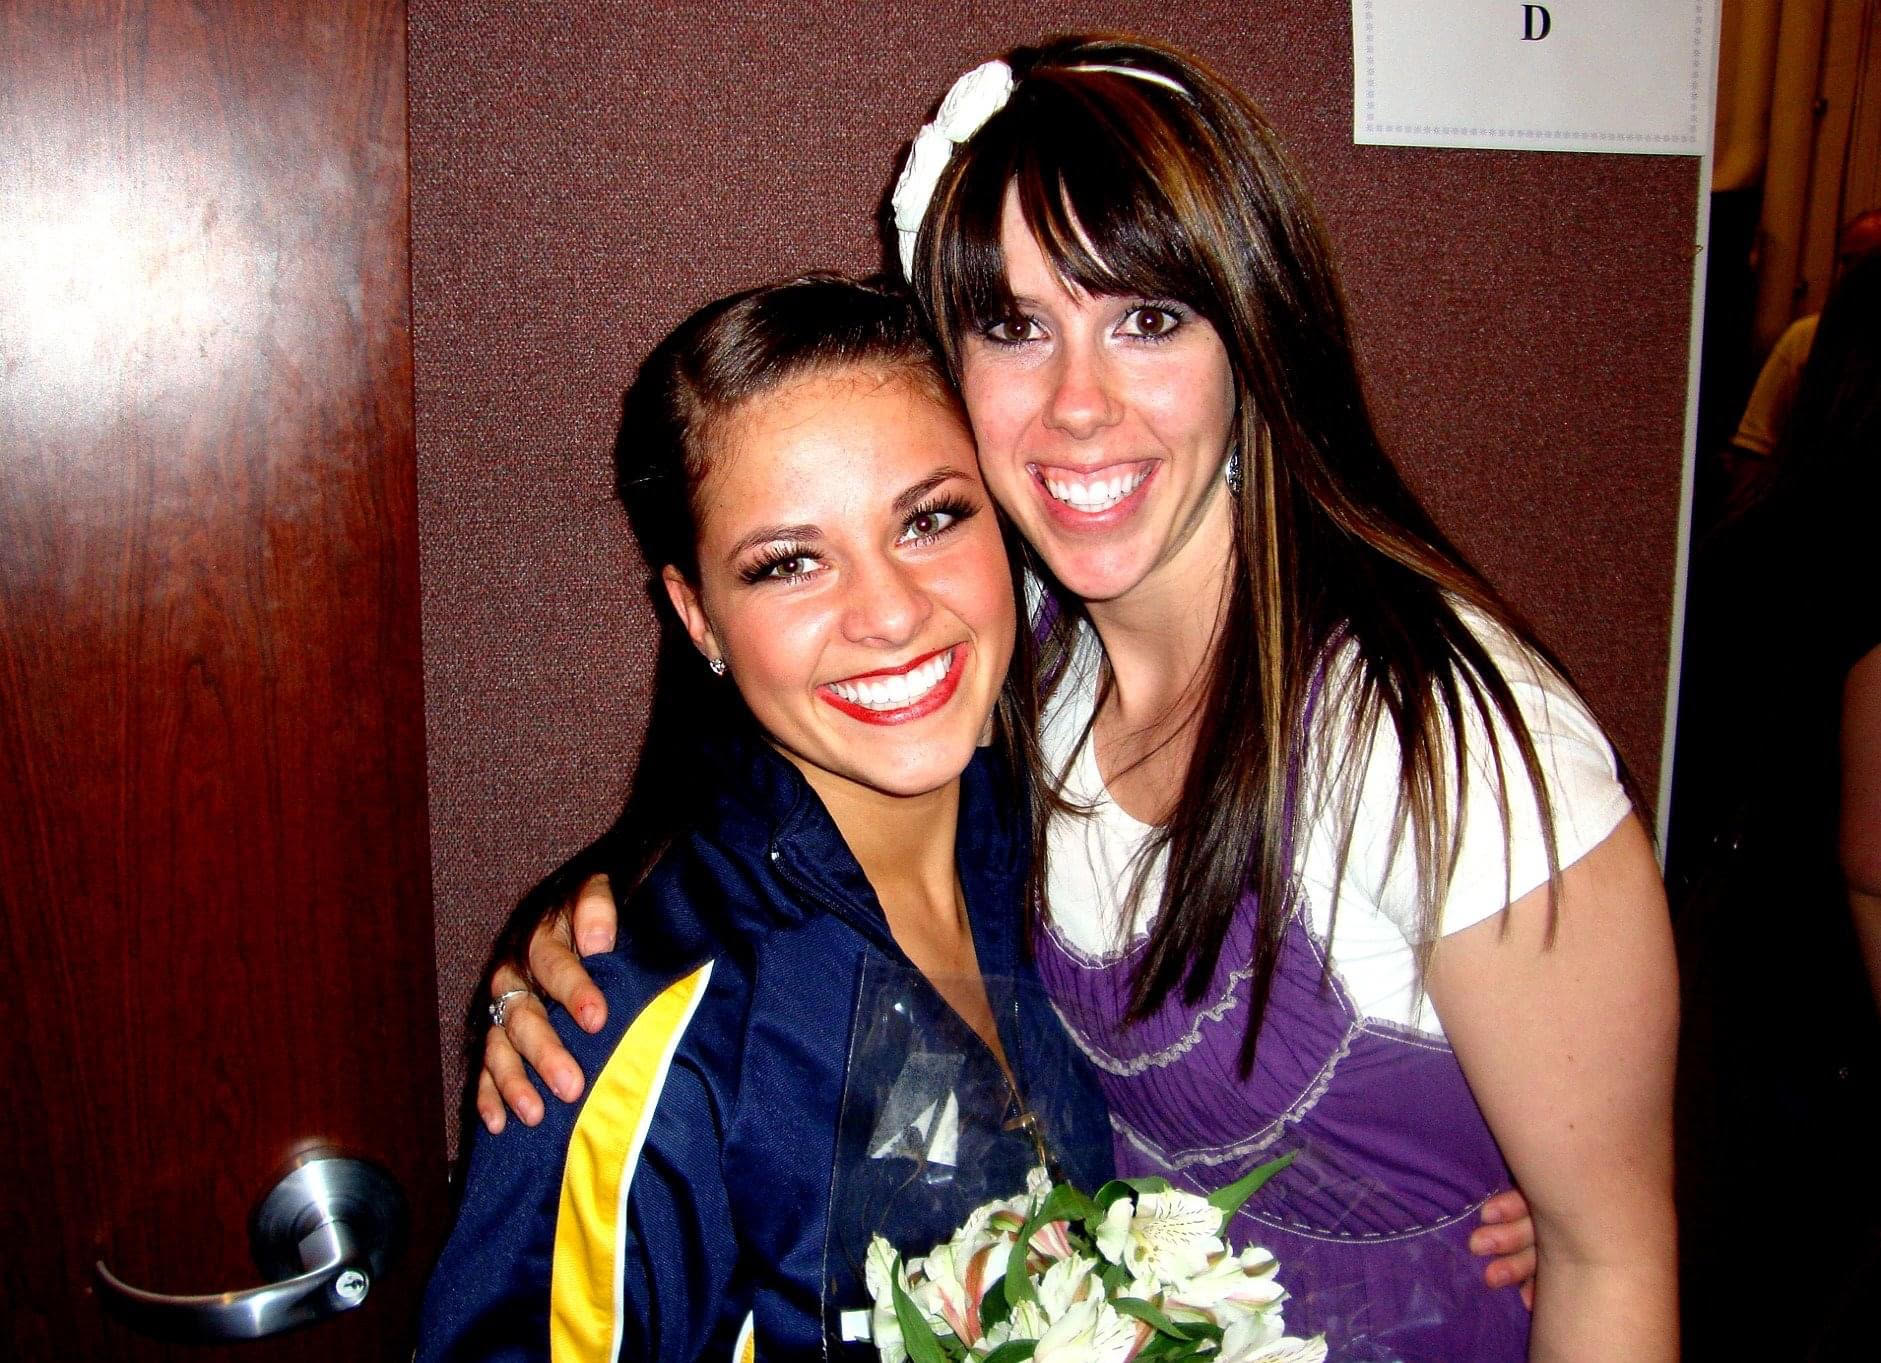 Image of student and dance teacher smiling together